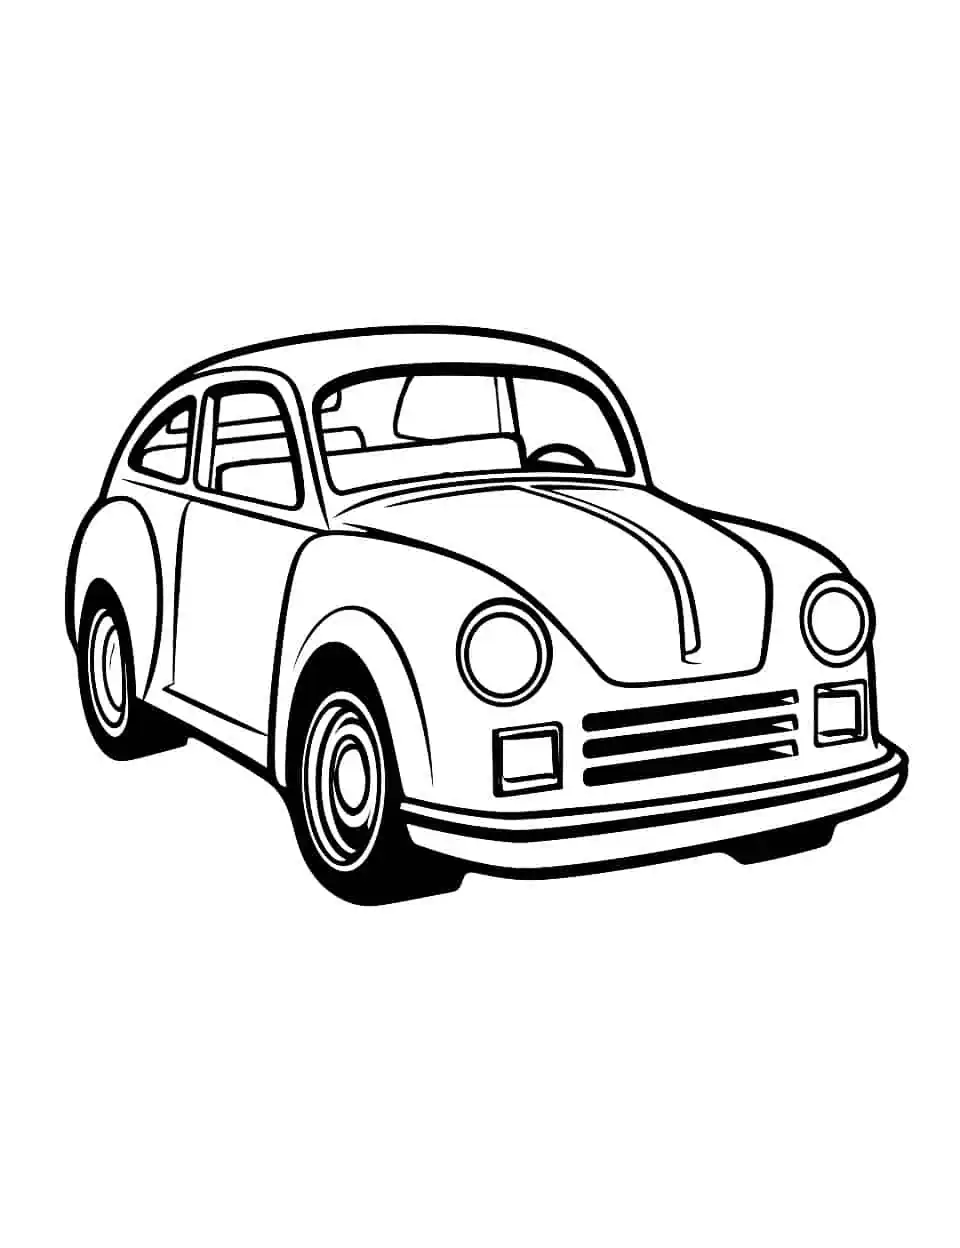 Easy Peasy Lemon Squeezy Car Coloring Page - An easy car picture, perfect for small children learning to color.